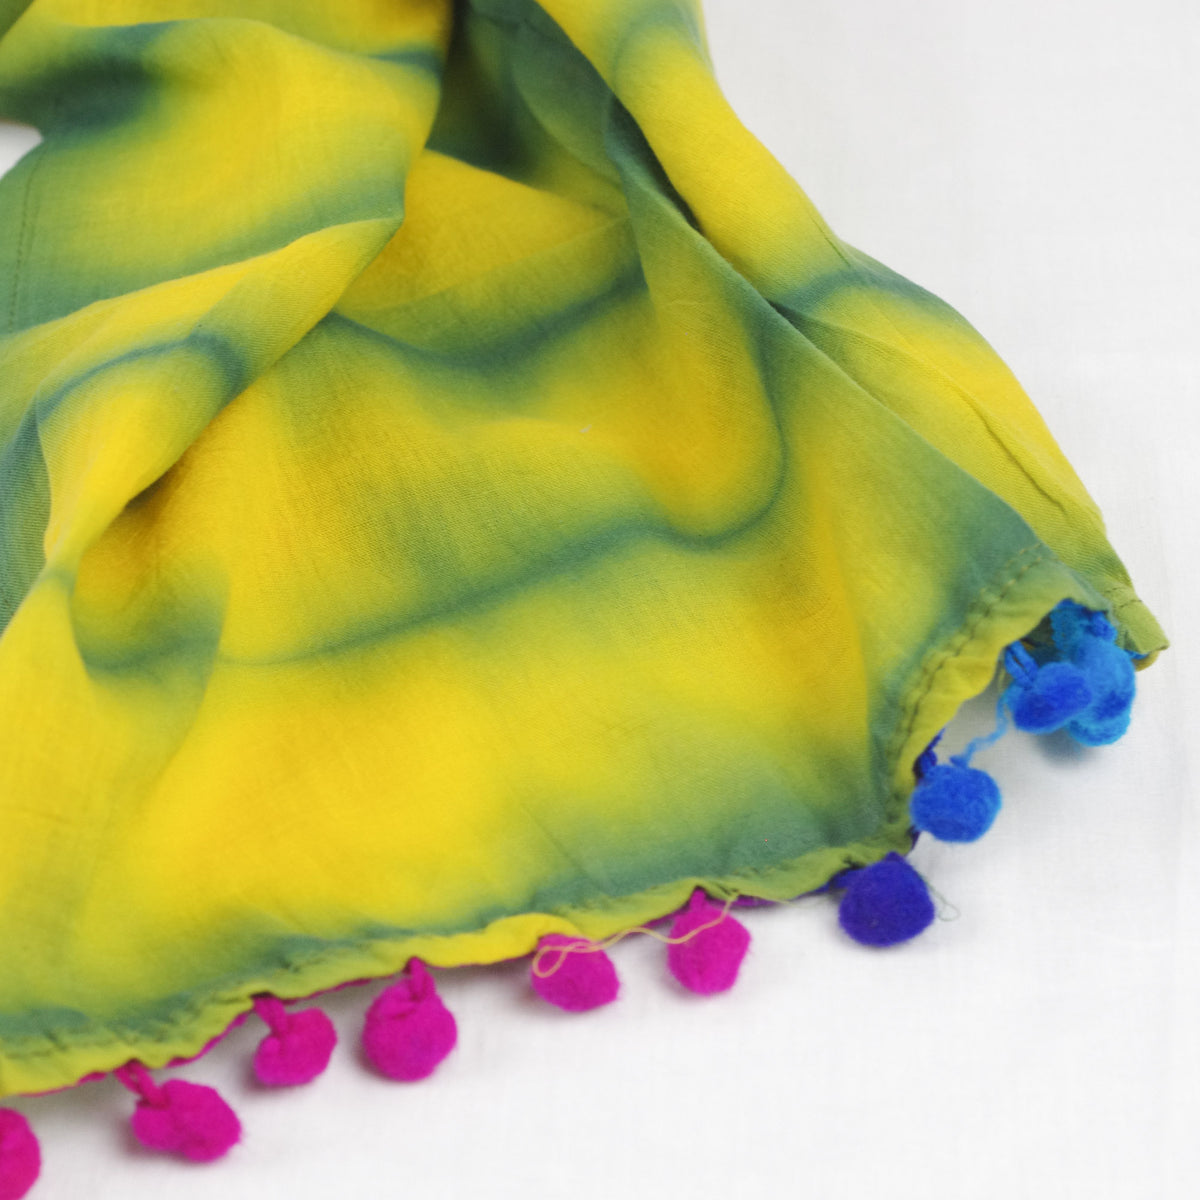 Cotton Scarf In  Green Yellow Tie Dye